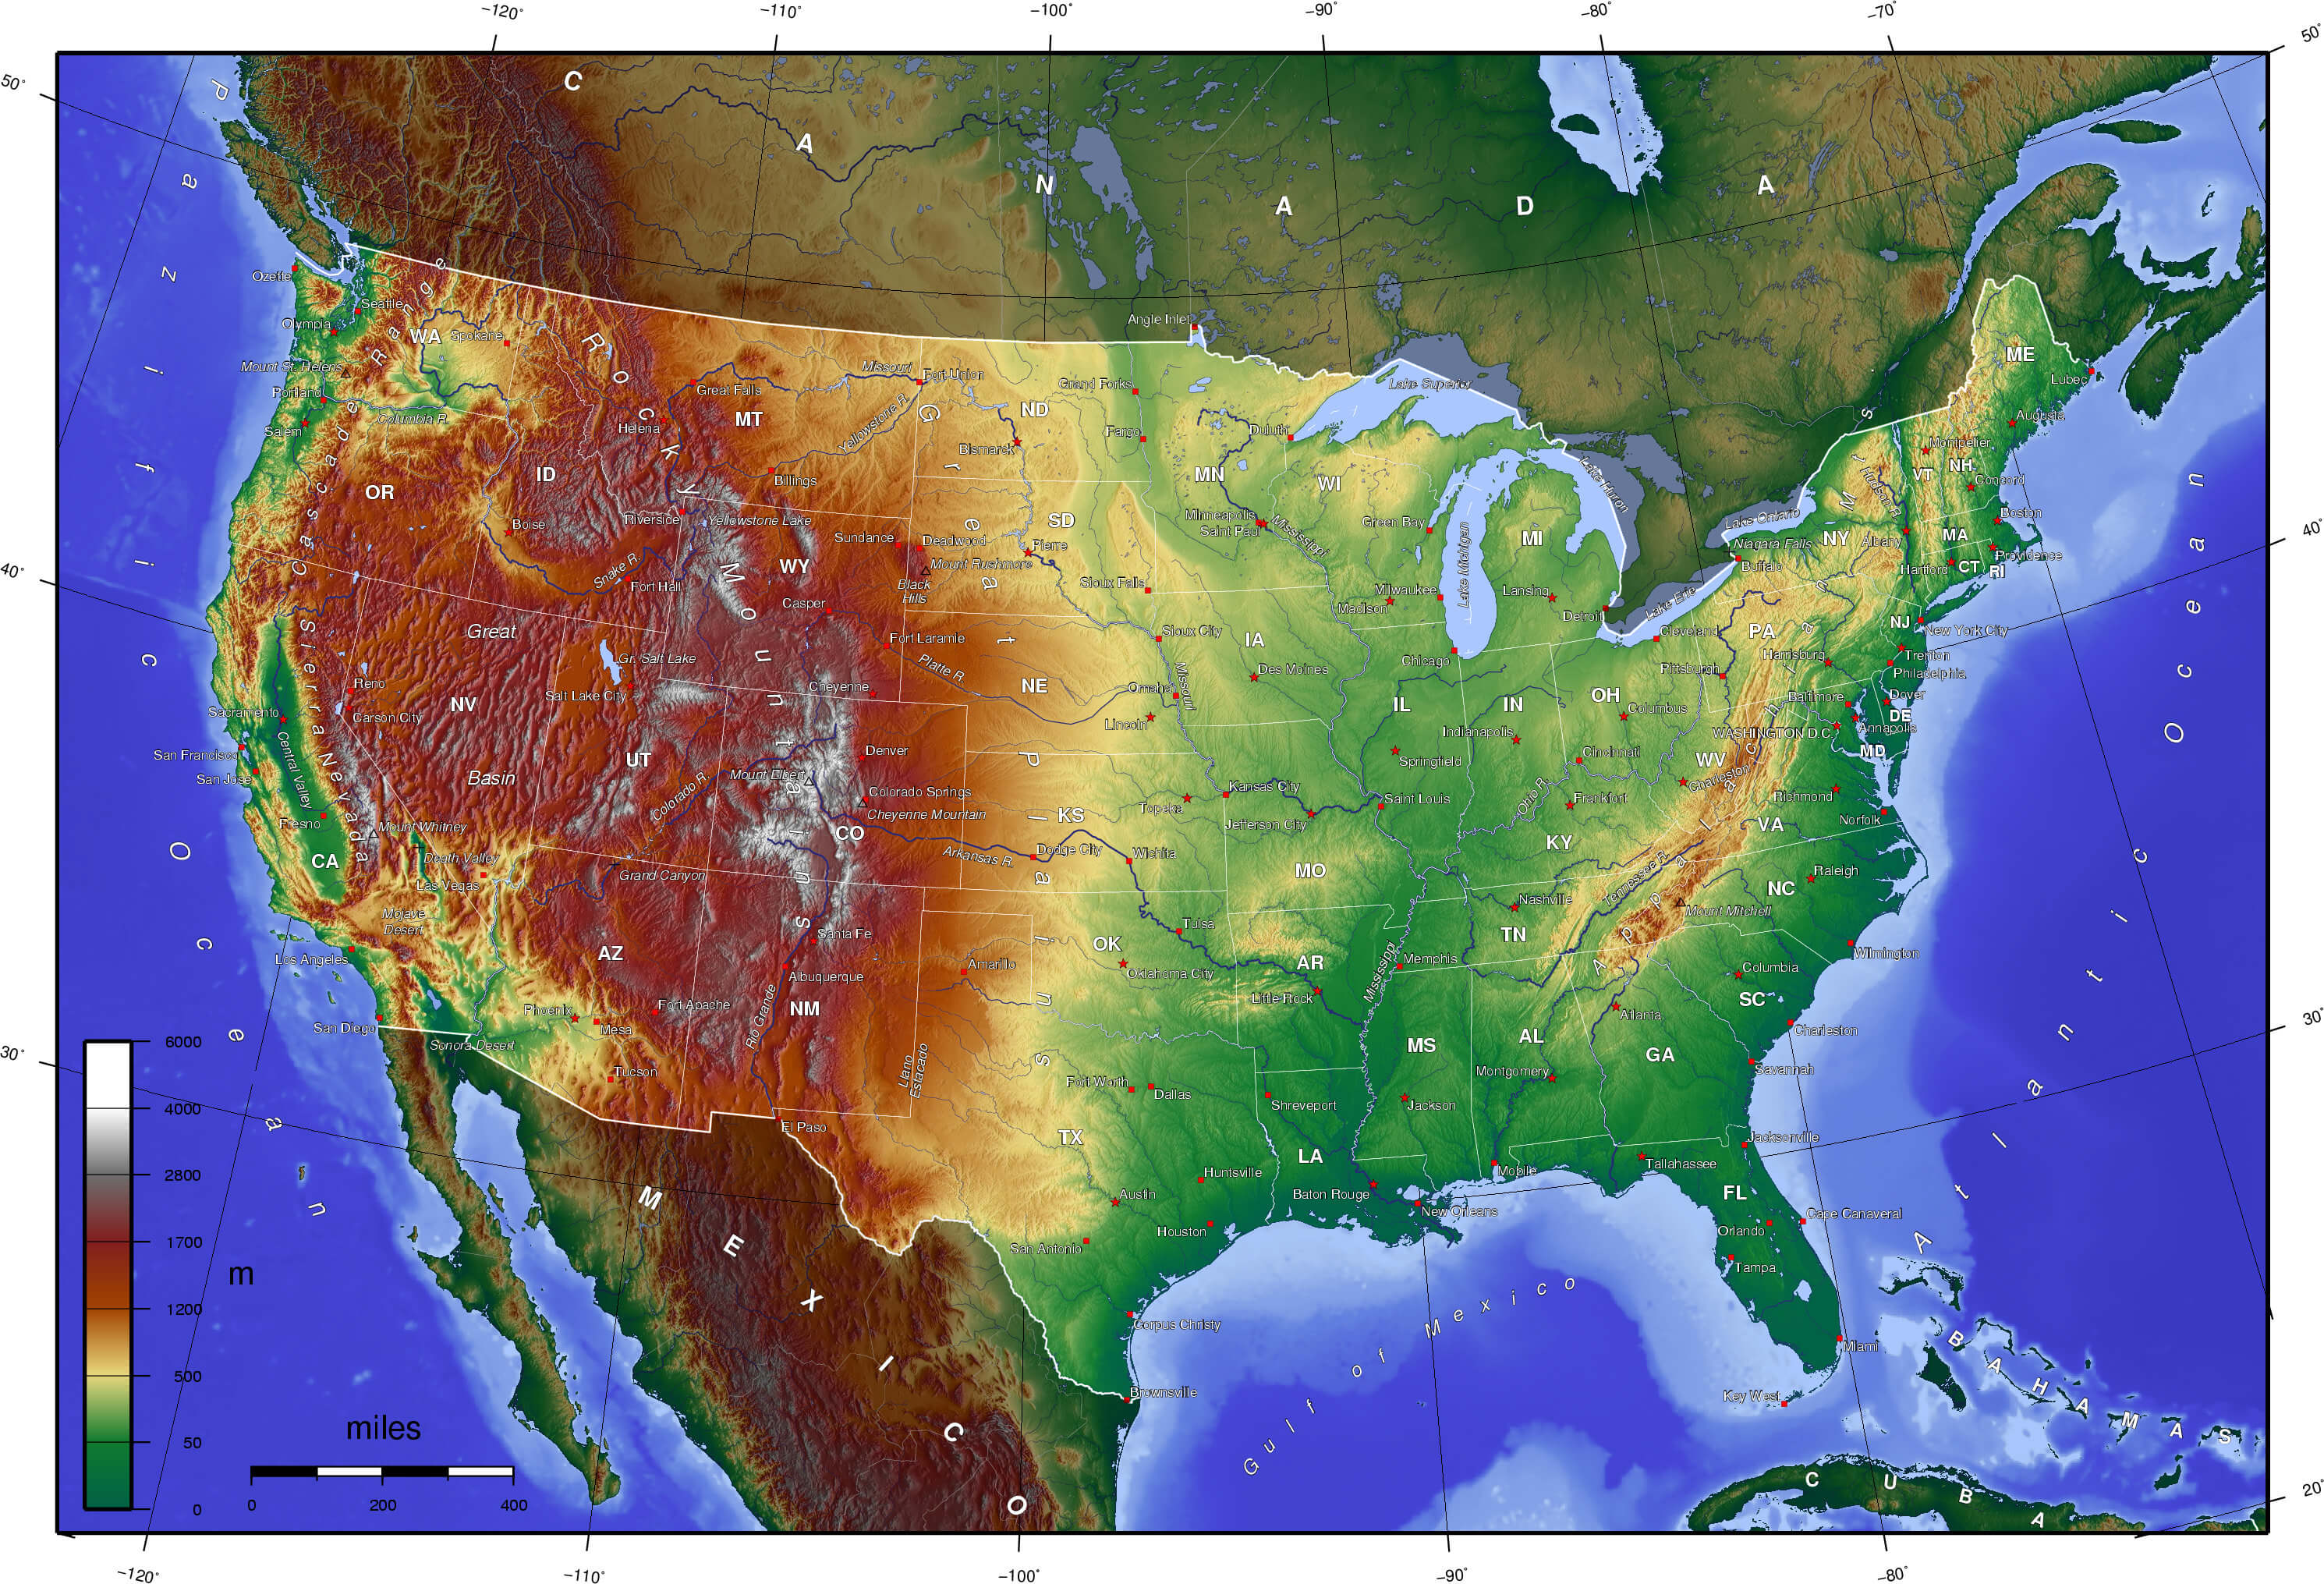 USA Mean Elevation Map